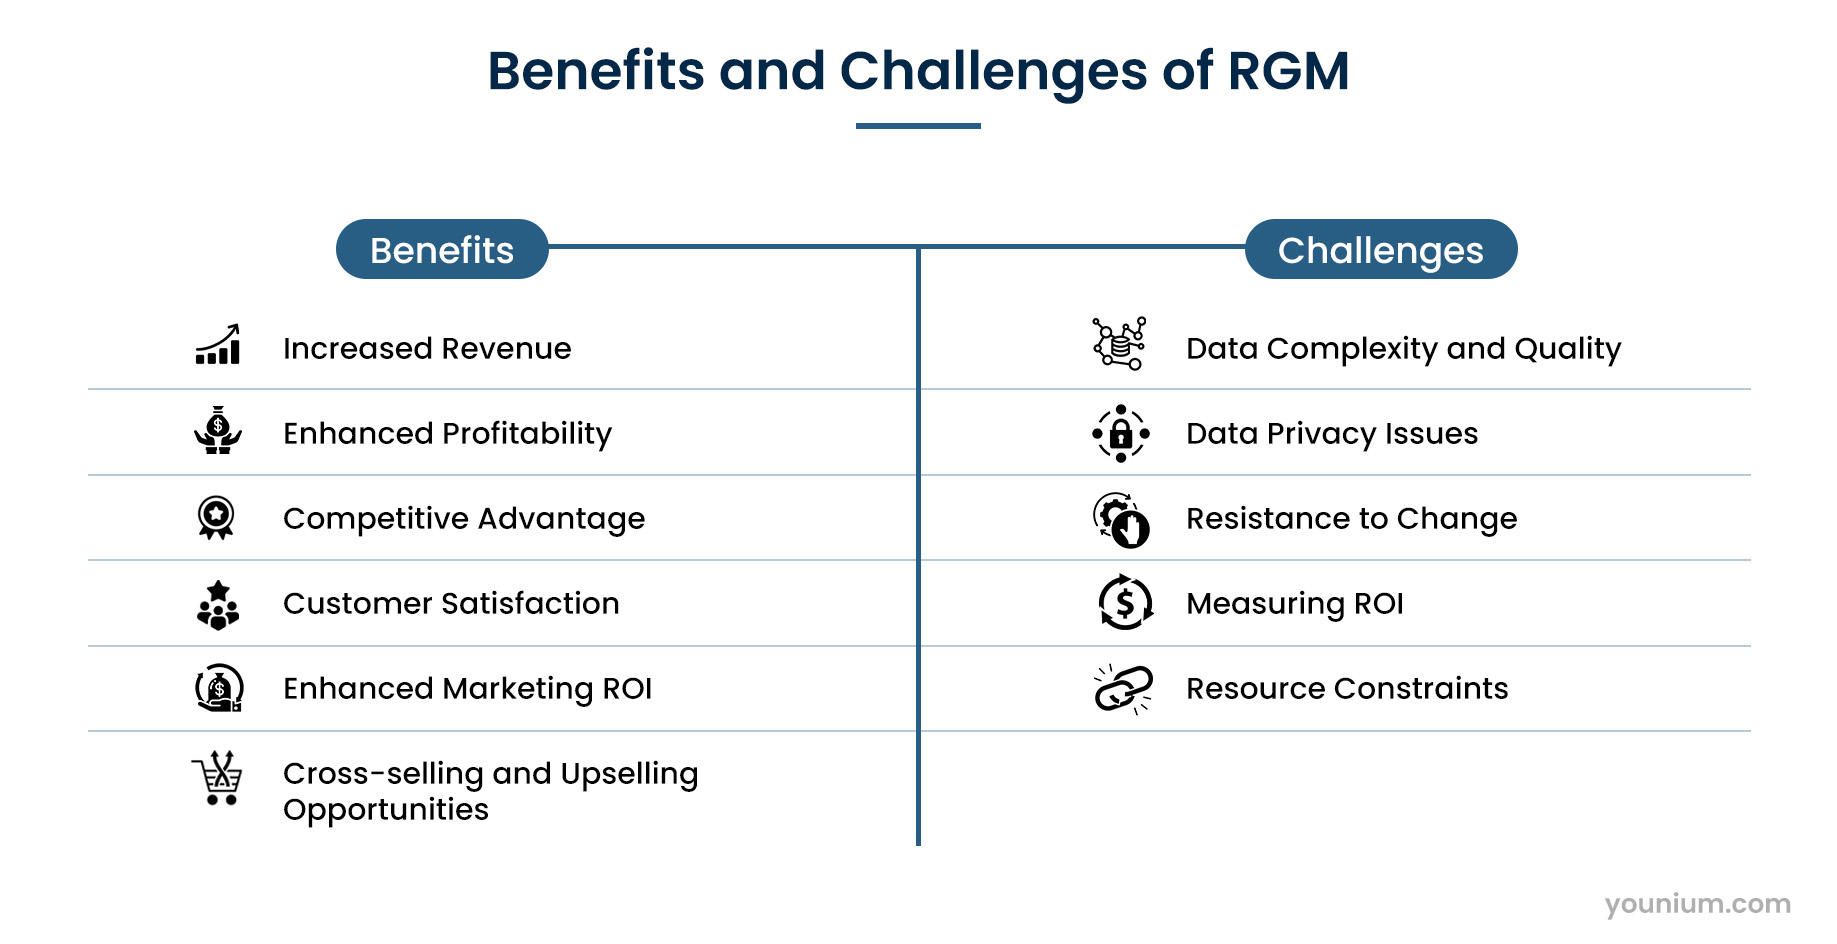 Benefits and Challenges of RGM